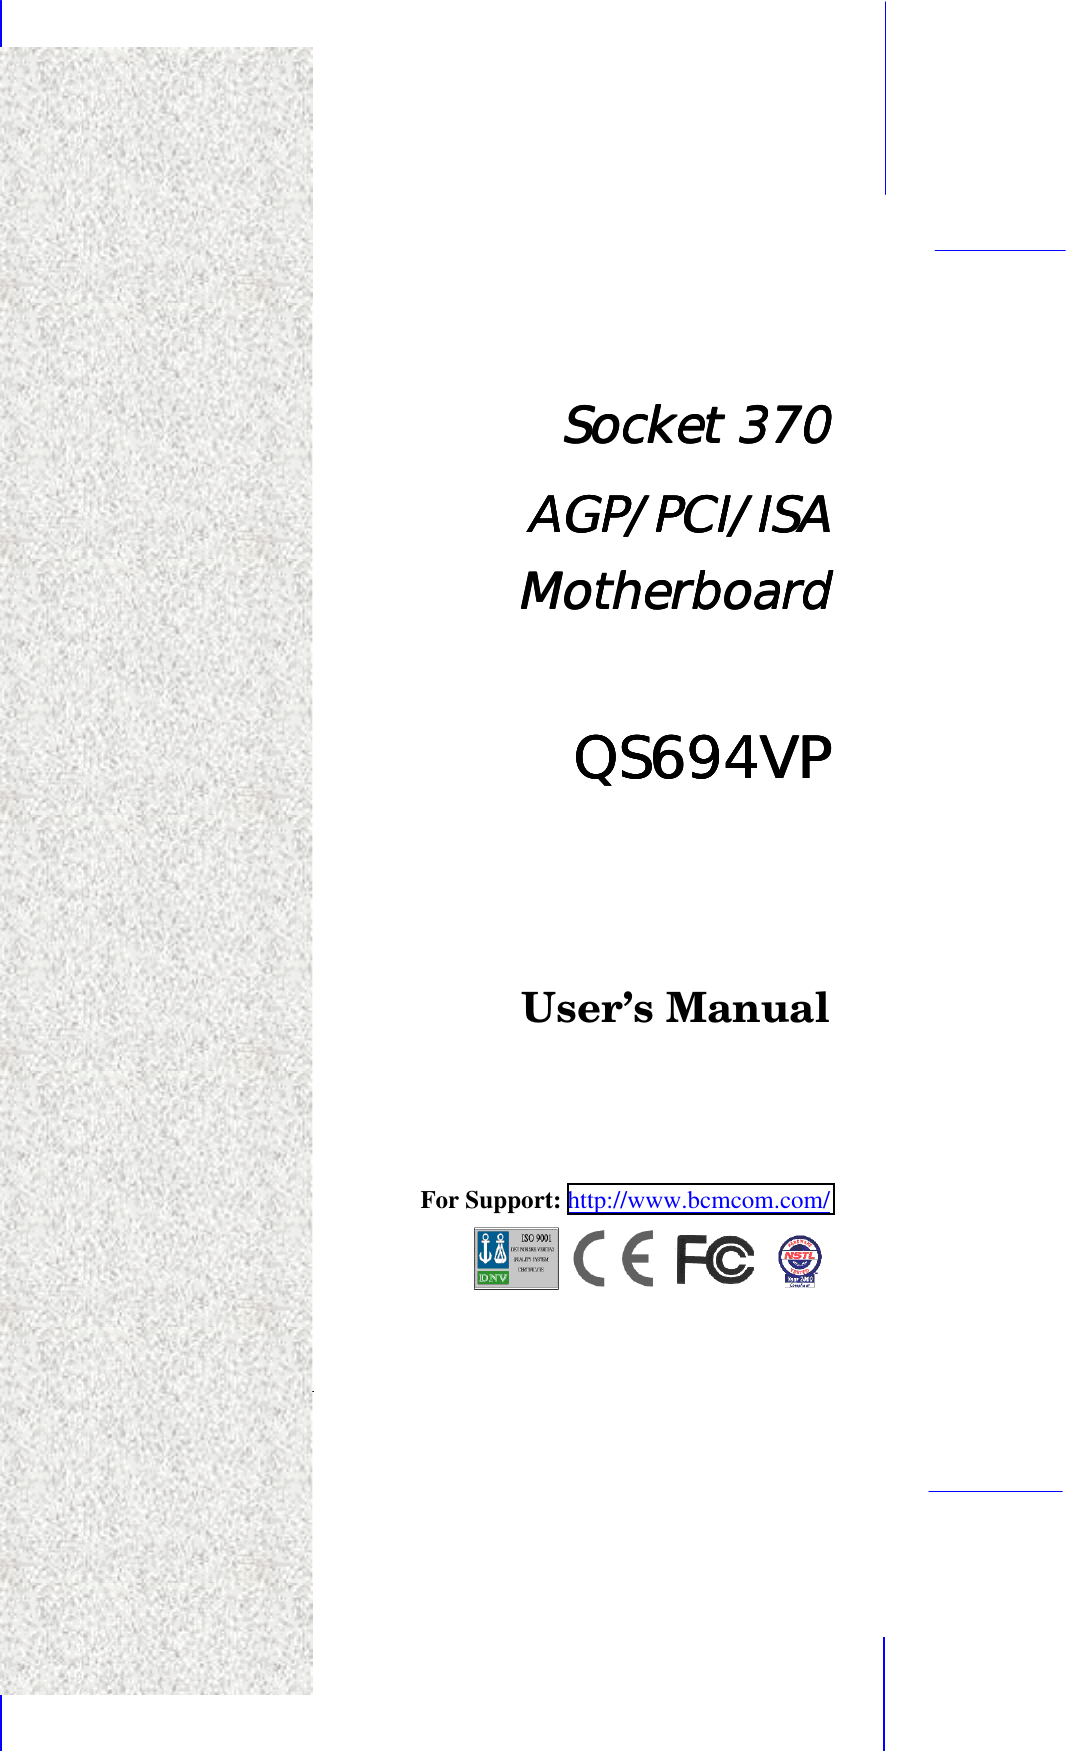   1  Socket 370 Socket 370 Socket 370 Socket 370     AGP/PCI/ISA AGP/PCI/ISA AGP/PCI/ISA AGP/PCI/ISA MotherboardMotherboardMotherboardMotherboard     QS694VPQS694VPQS694VPQS694VP       User’s Manual     For Support: http://www.bcmcom.com/      